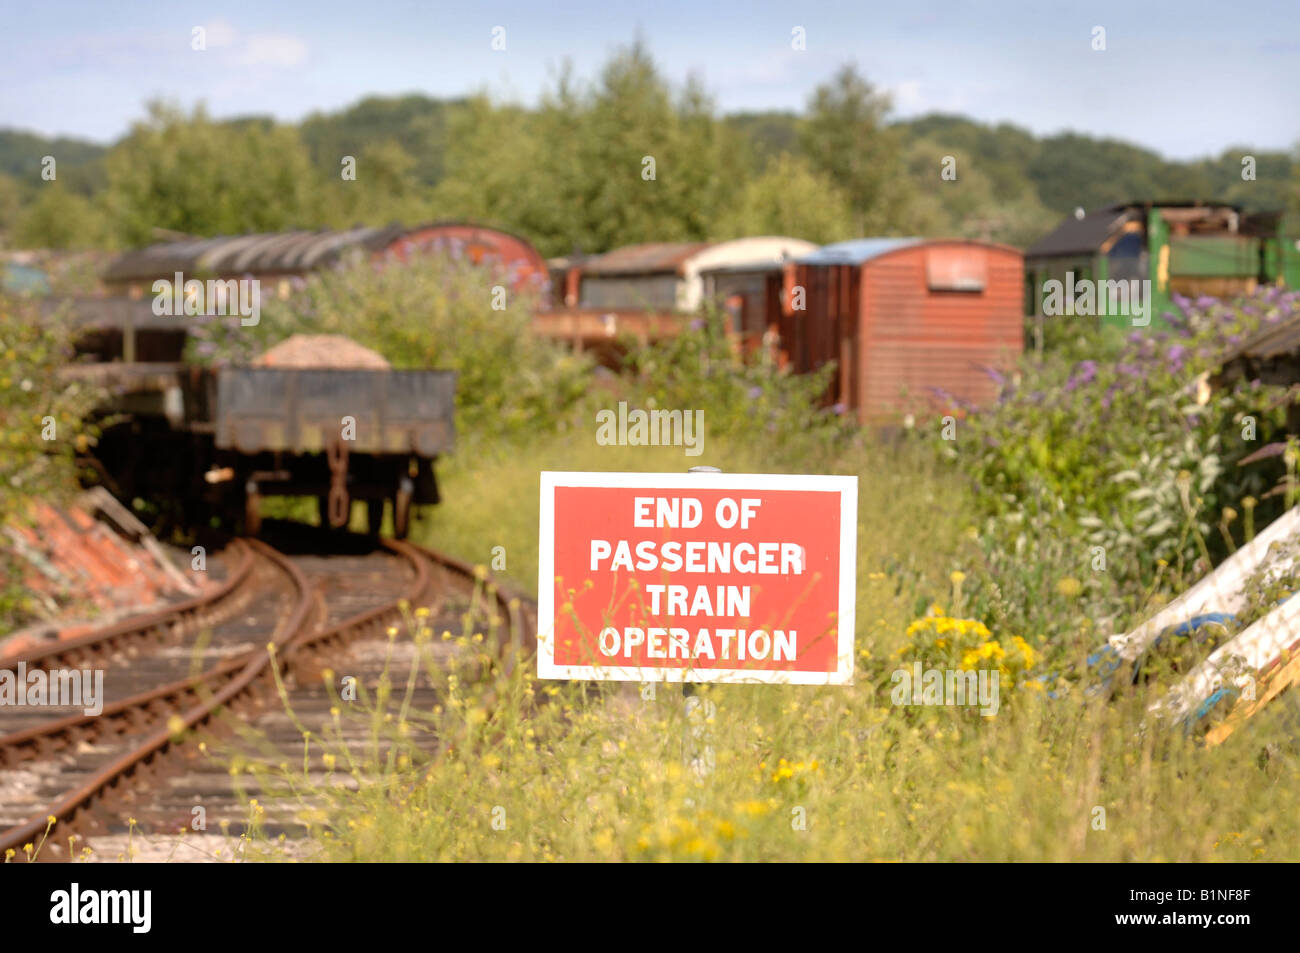 OLD RAILWAY CARRIAGES USED AS SHEDS NEAR LYDNEY JUNCTION STATION GLOUCESTERSHIRE UK Stock Photo